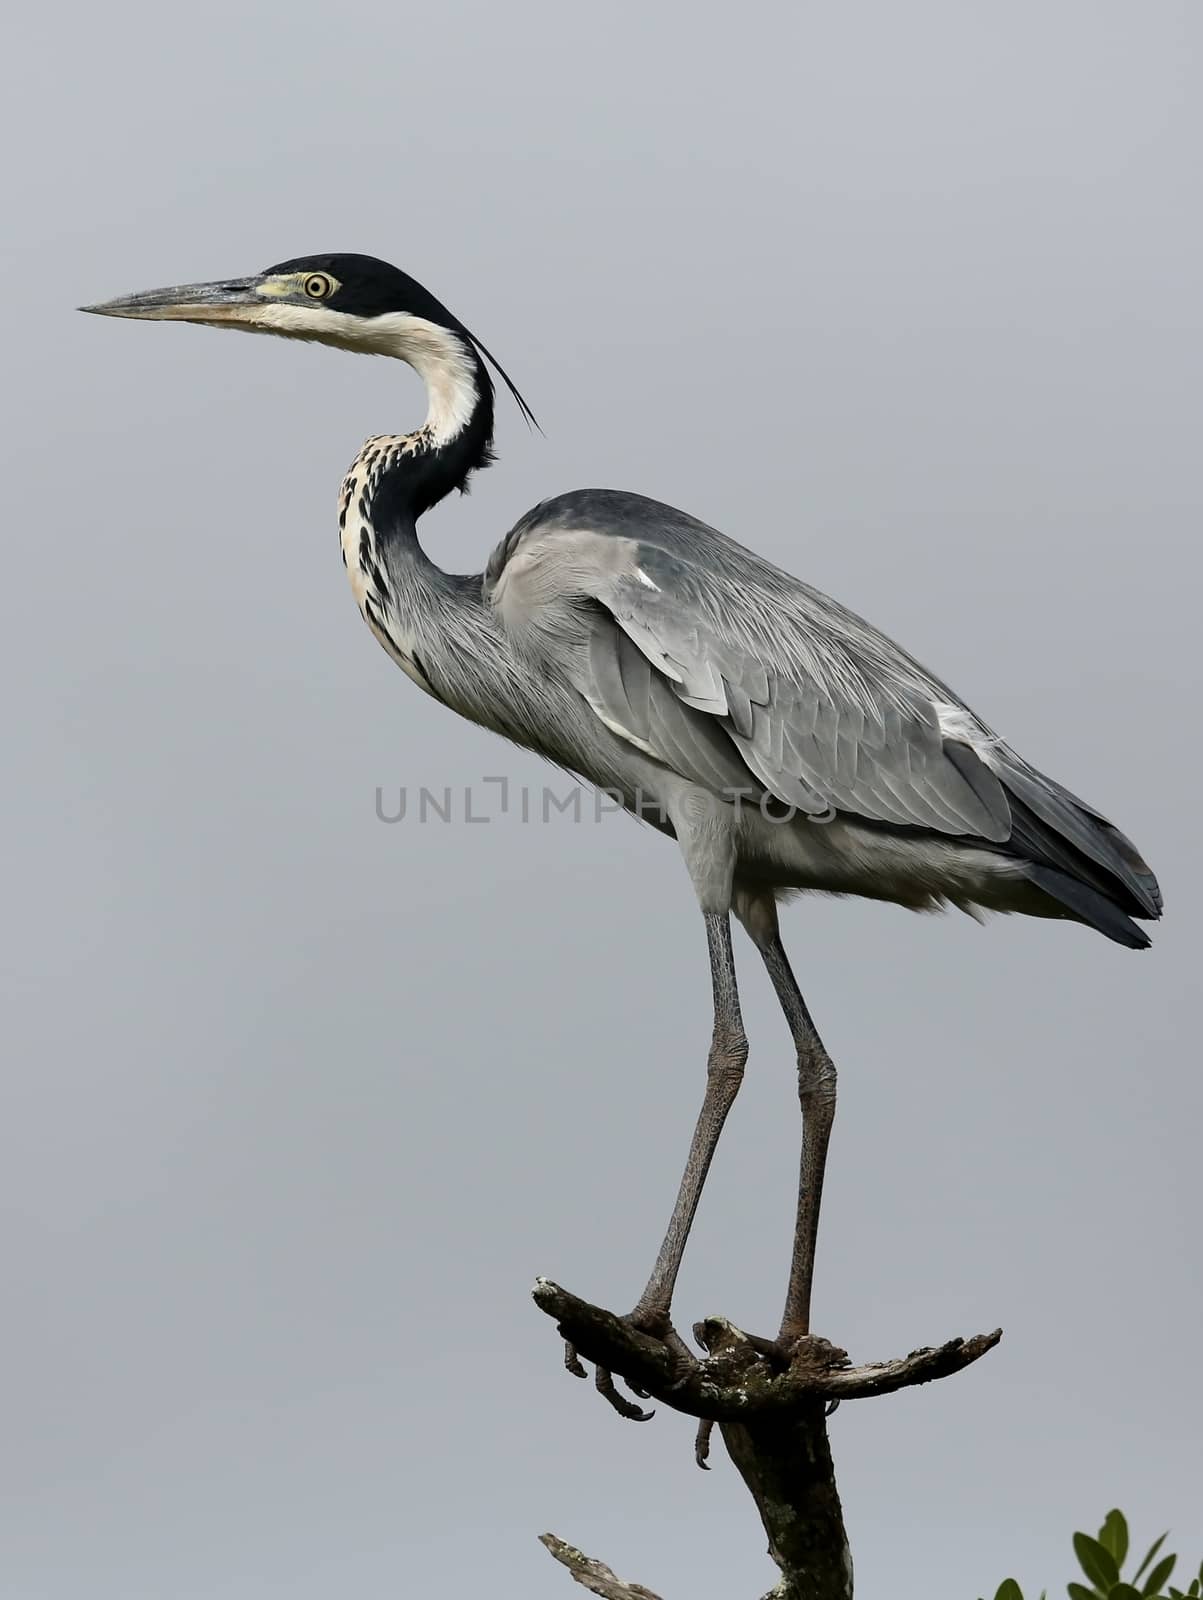 Black Heron bird with long legs and neck perched on a branch